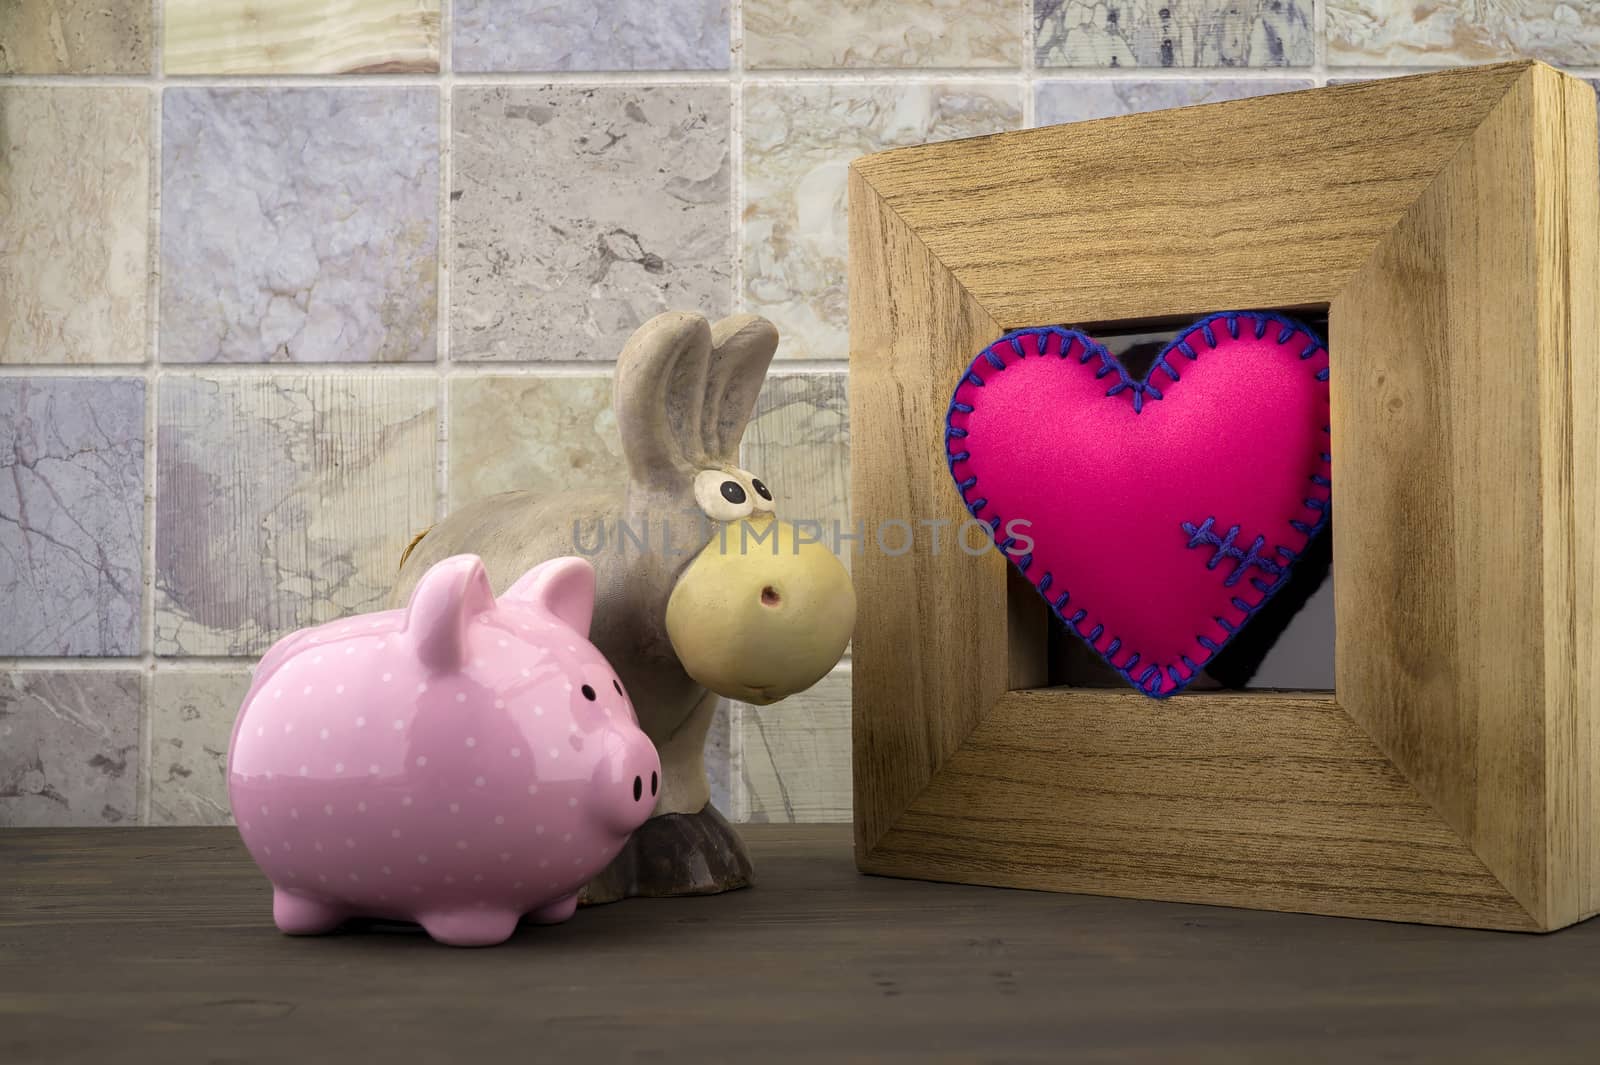 Cute little piggy bank and toy donkey with a handcrafted pink heart in a wooden frame against a tiled background